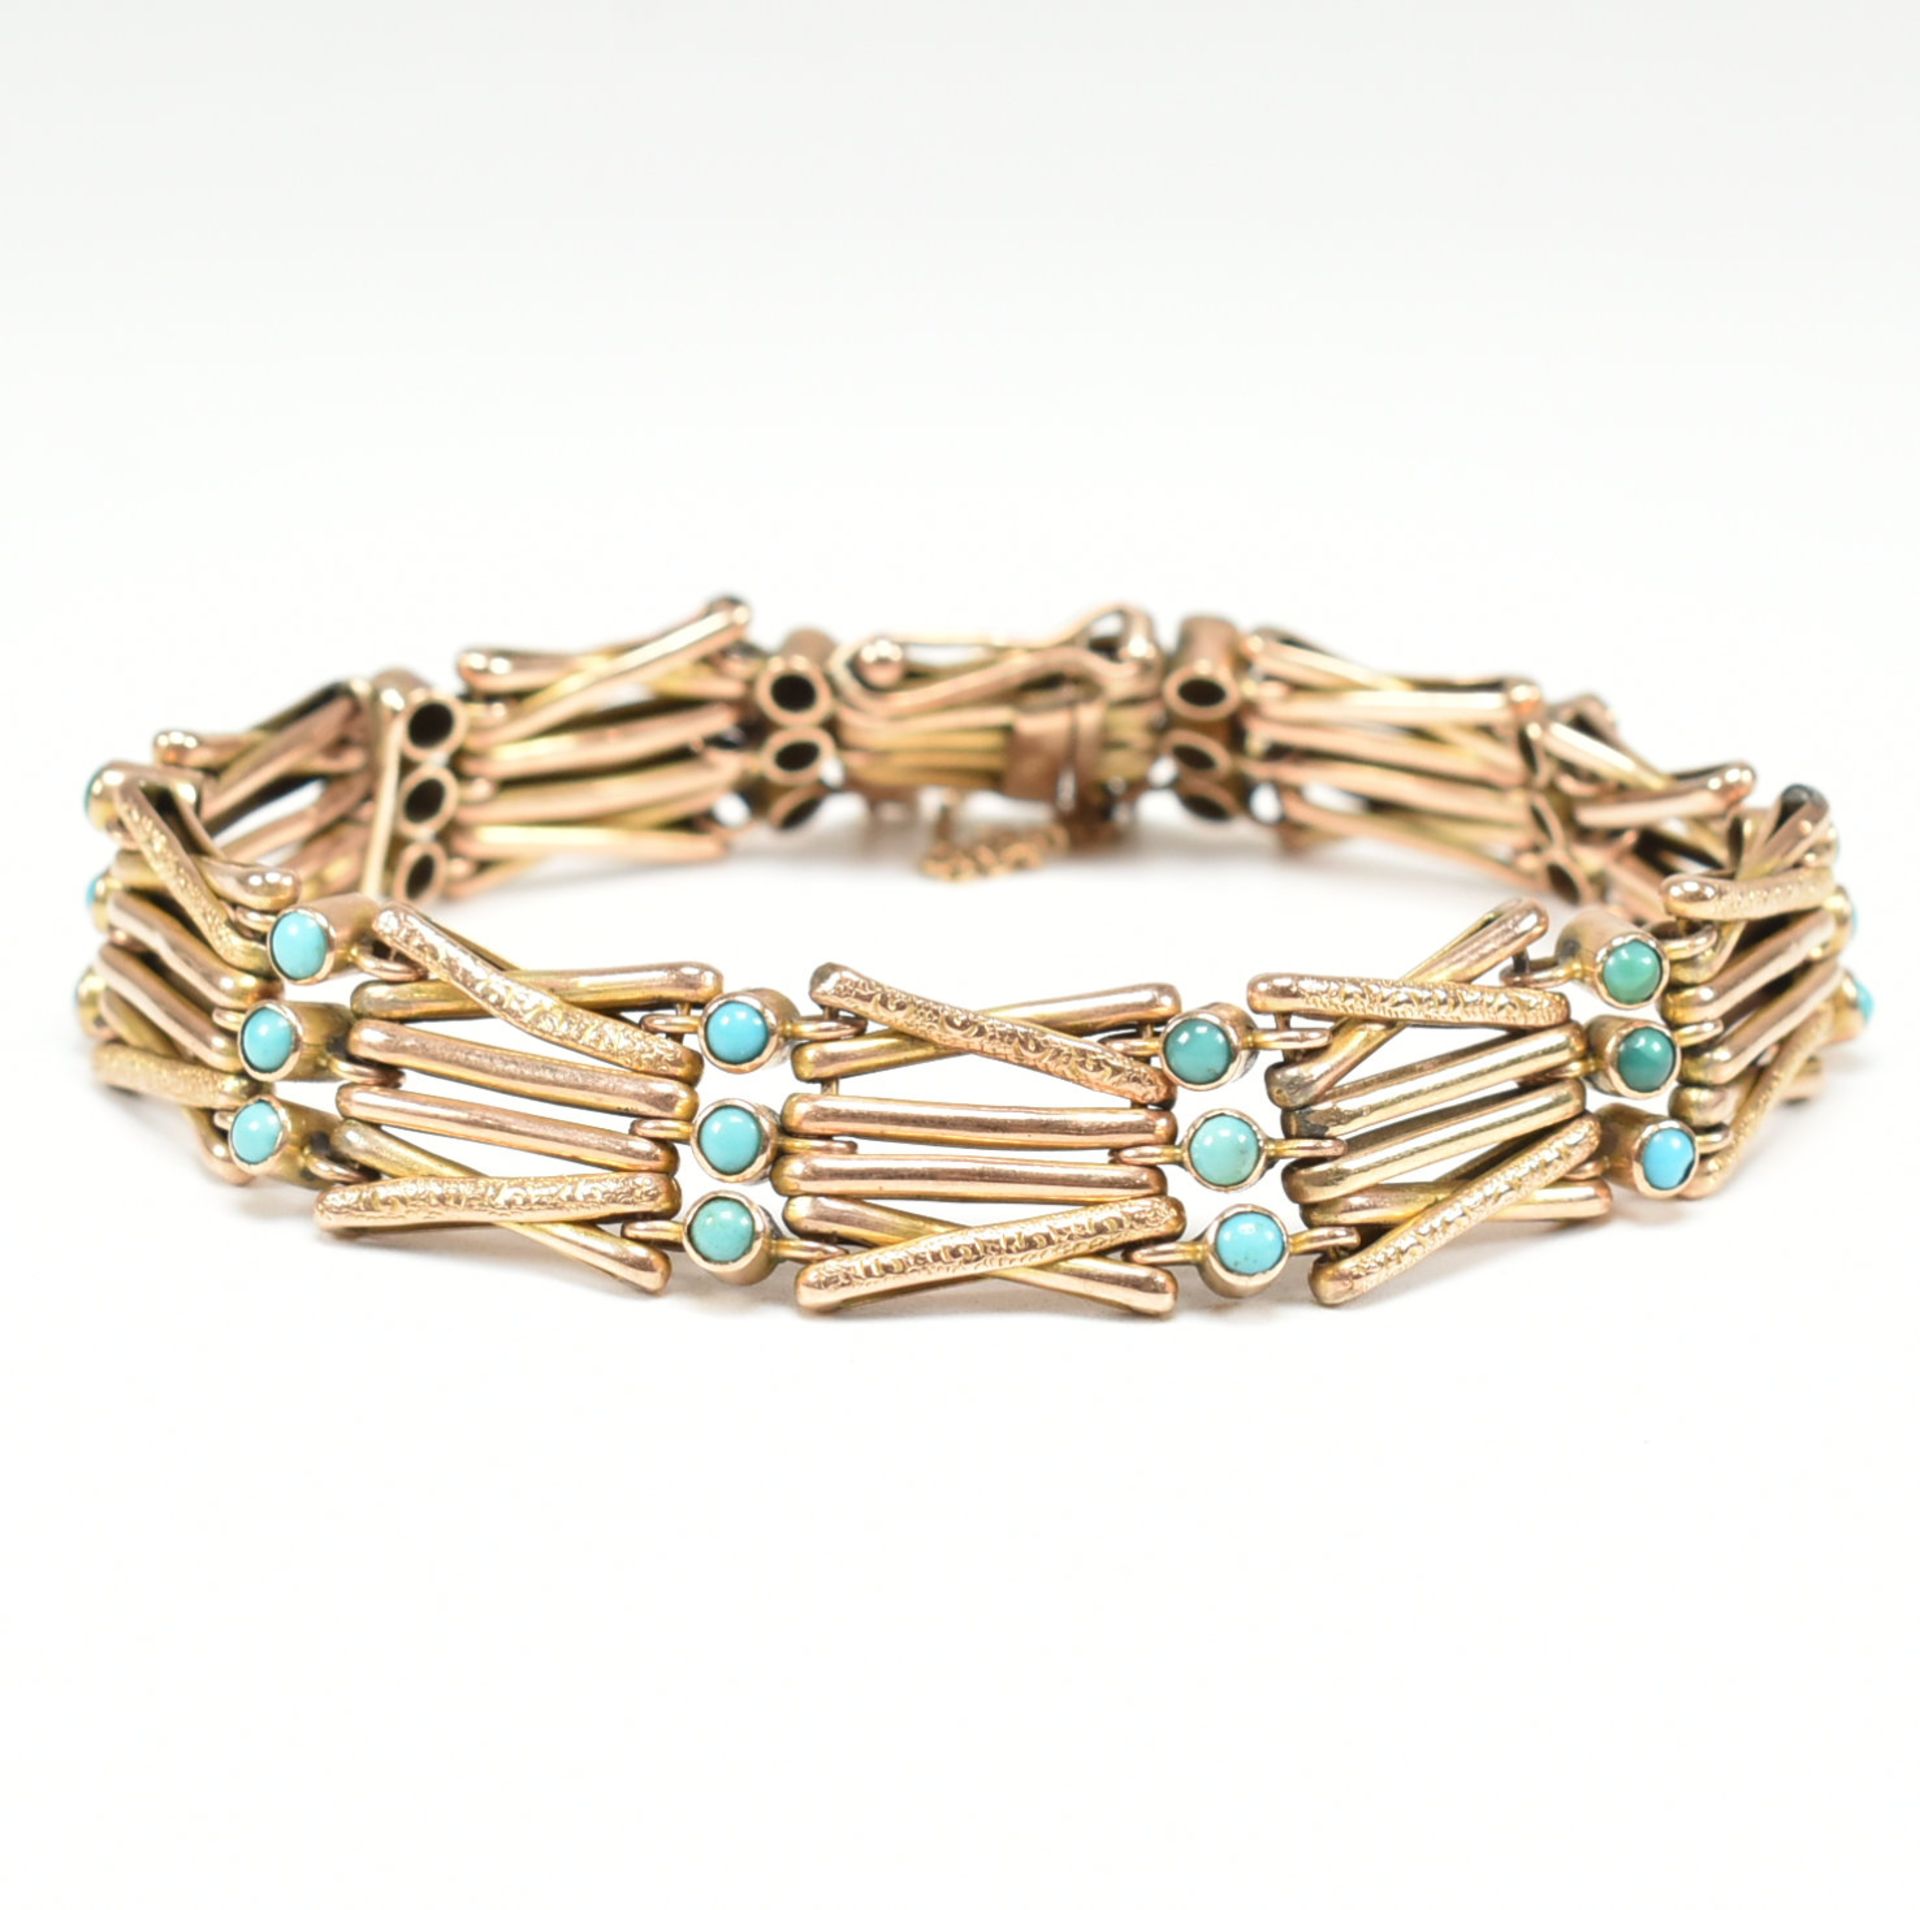 ANTIQUE 9CT GOLD & TURQUOISE BRACELET CHAIN - Image 3 of 5